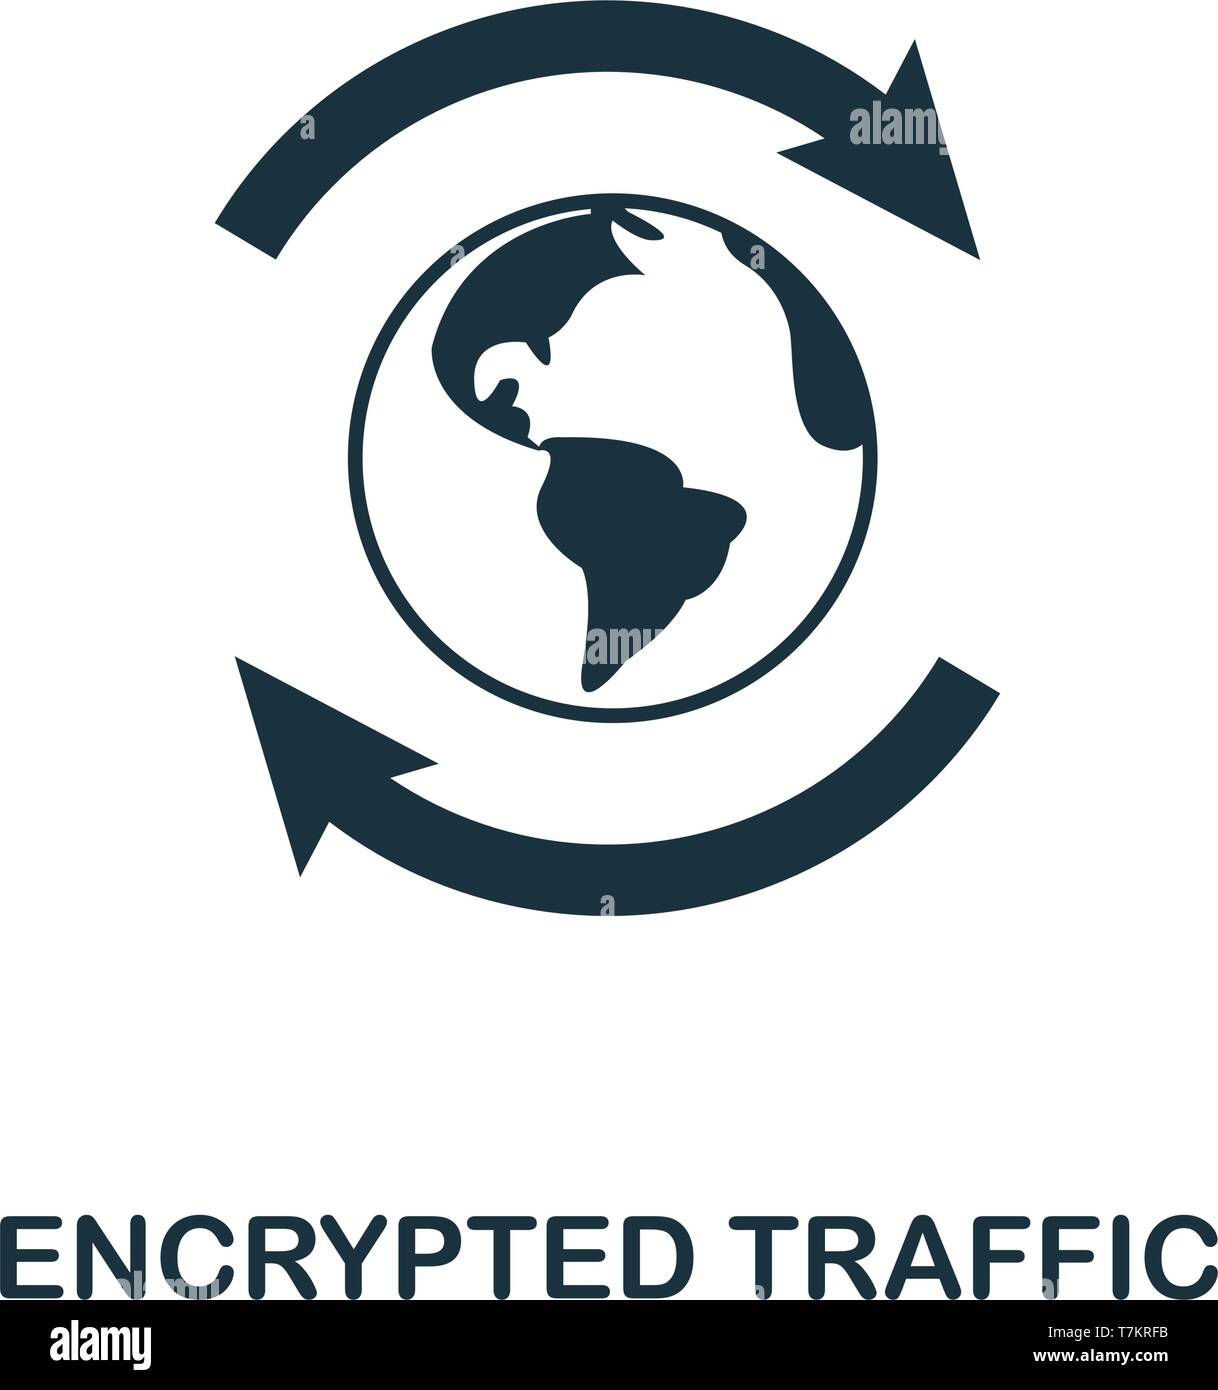 Encrypted Traffic icon. Creative element design from icons collection. Pixel perfect Encrypted Traffic icon for web design, apps, software, print usag Stock Vector